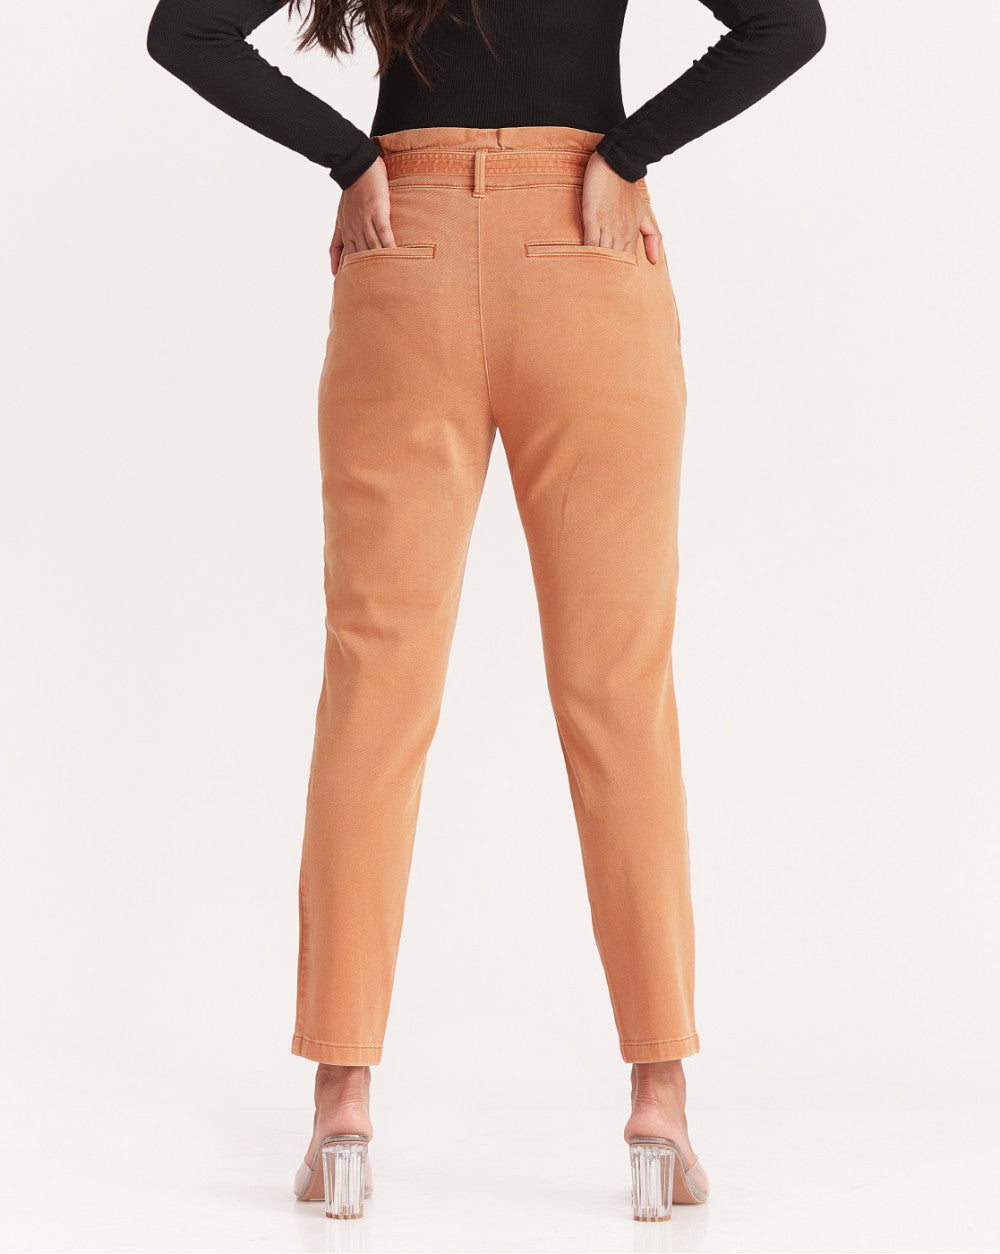 Tapered Fit Juan Tapered Garment-Dyed Pants - Almond Brown